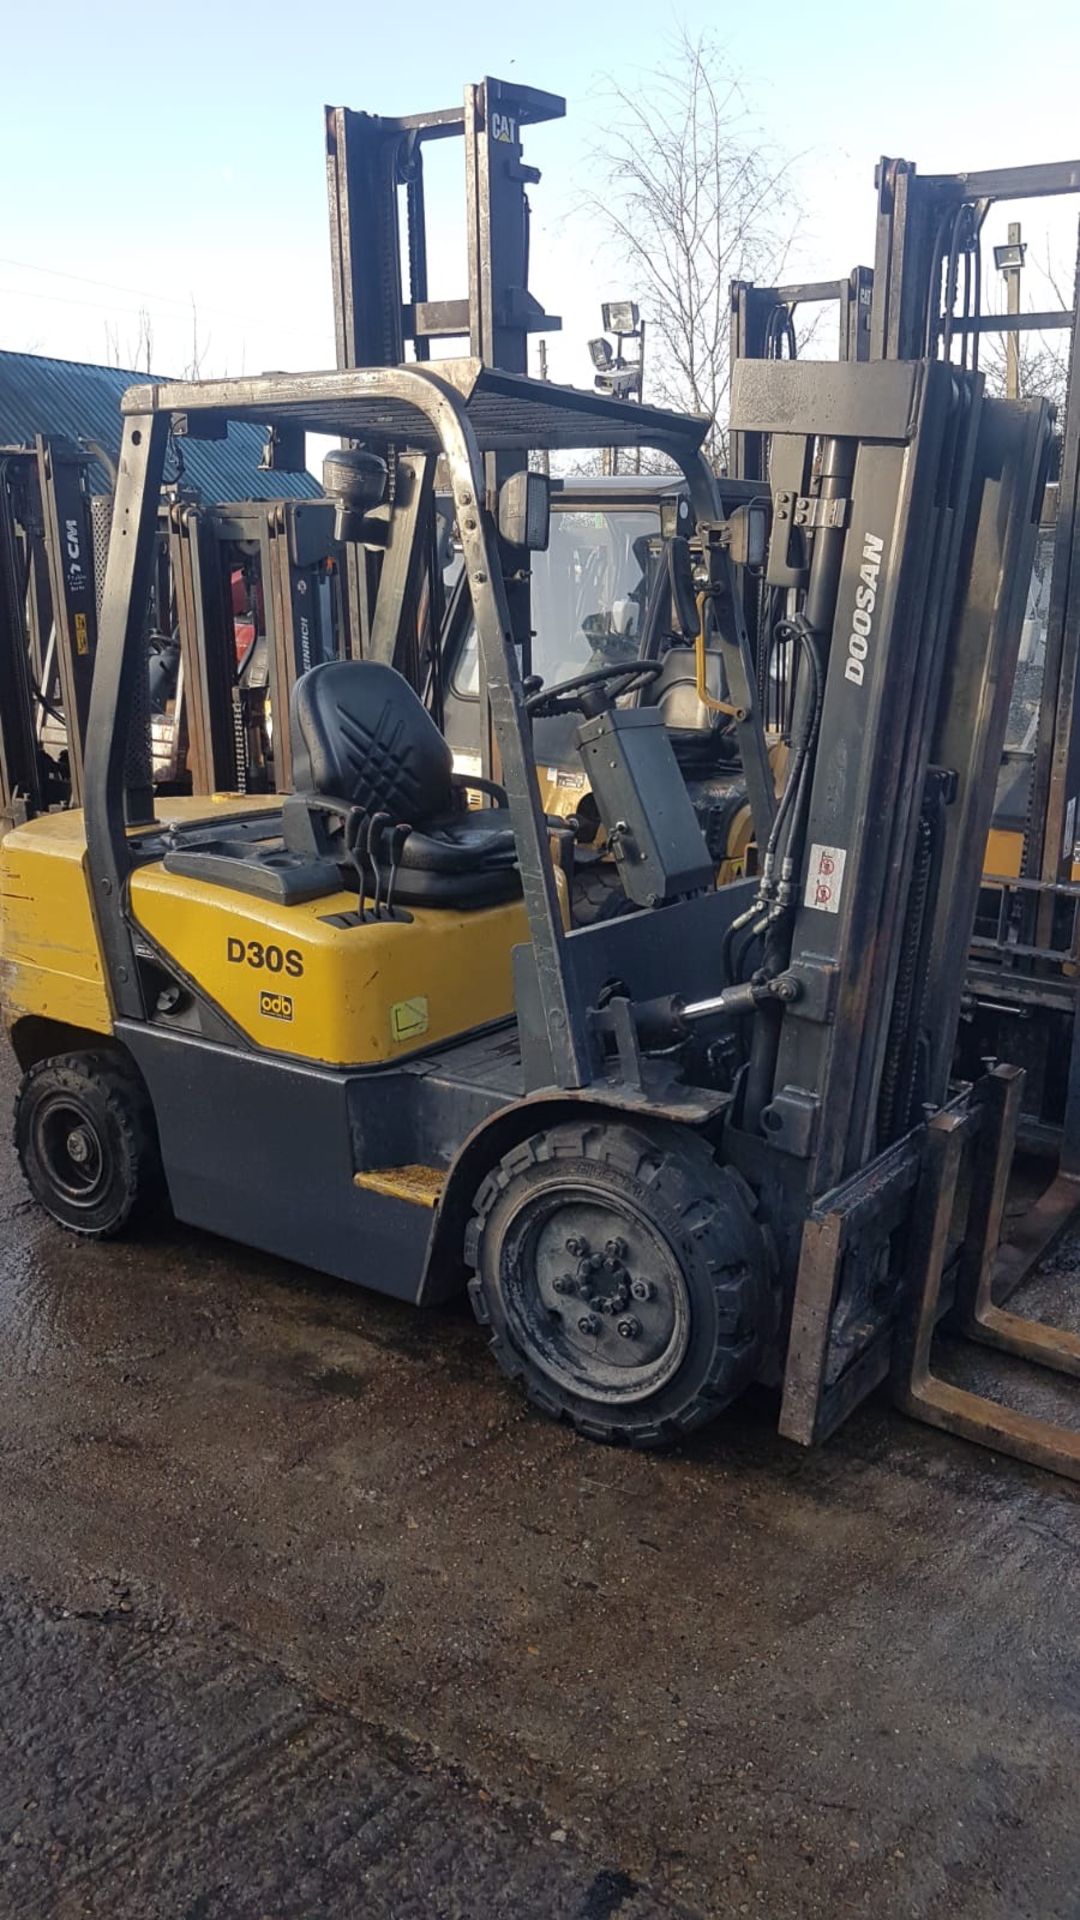 DAEWOO D30S DIESEL ENGINED FORKLIFT TRUCK, YEAR 2004 3 TONNE LIFT 4.7METRE TRIPLE MAST WITH SIDE - Image 3 of 3